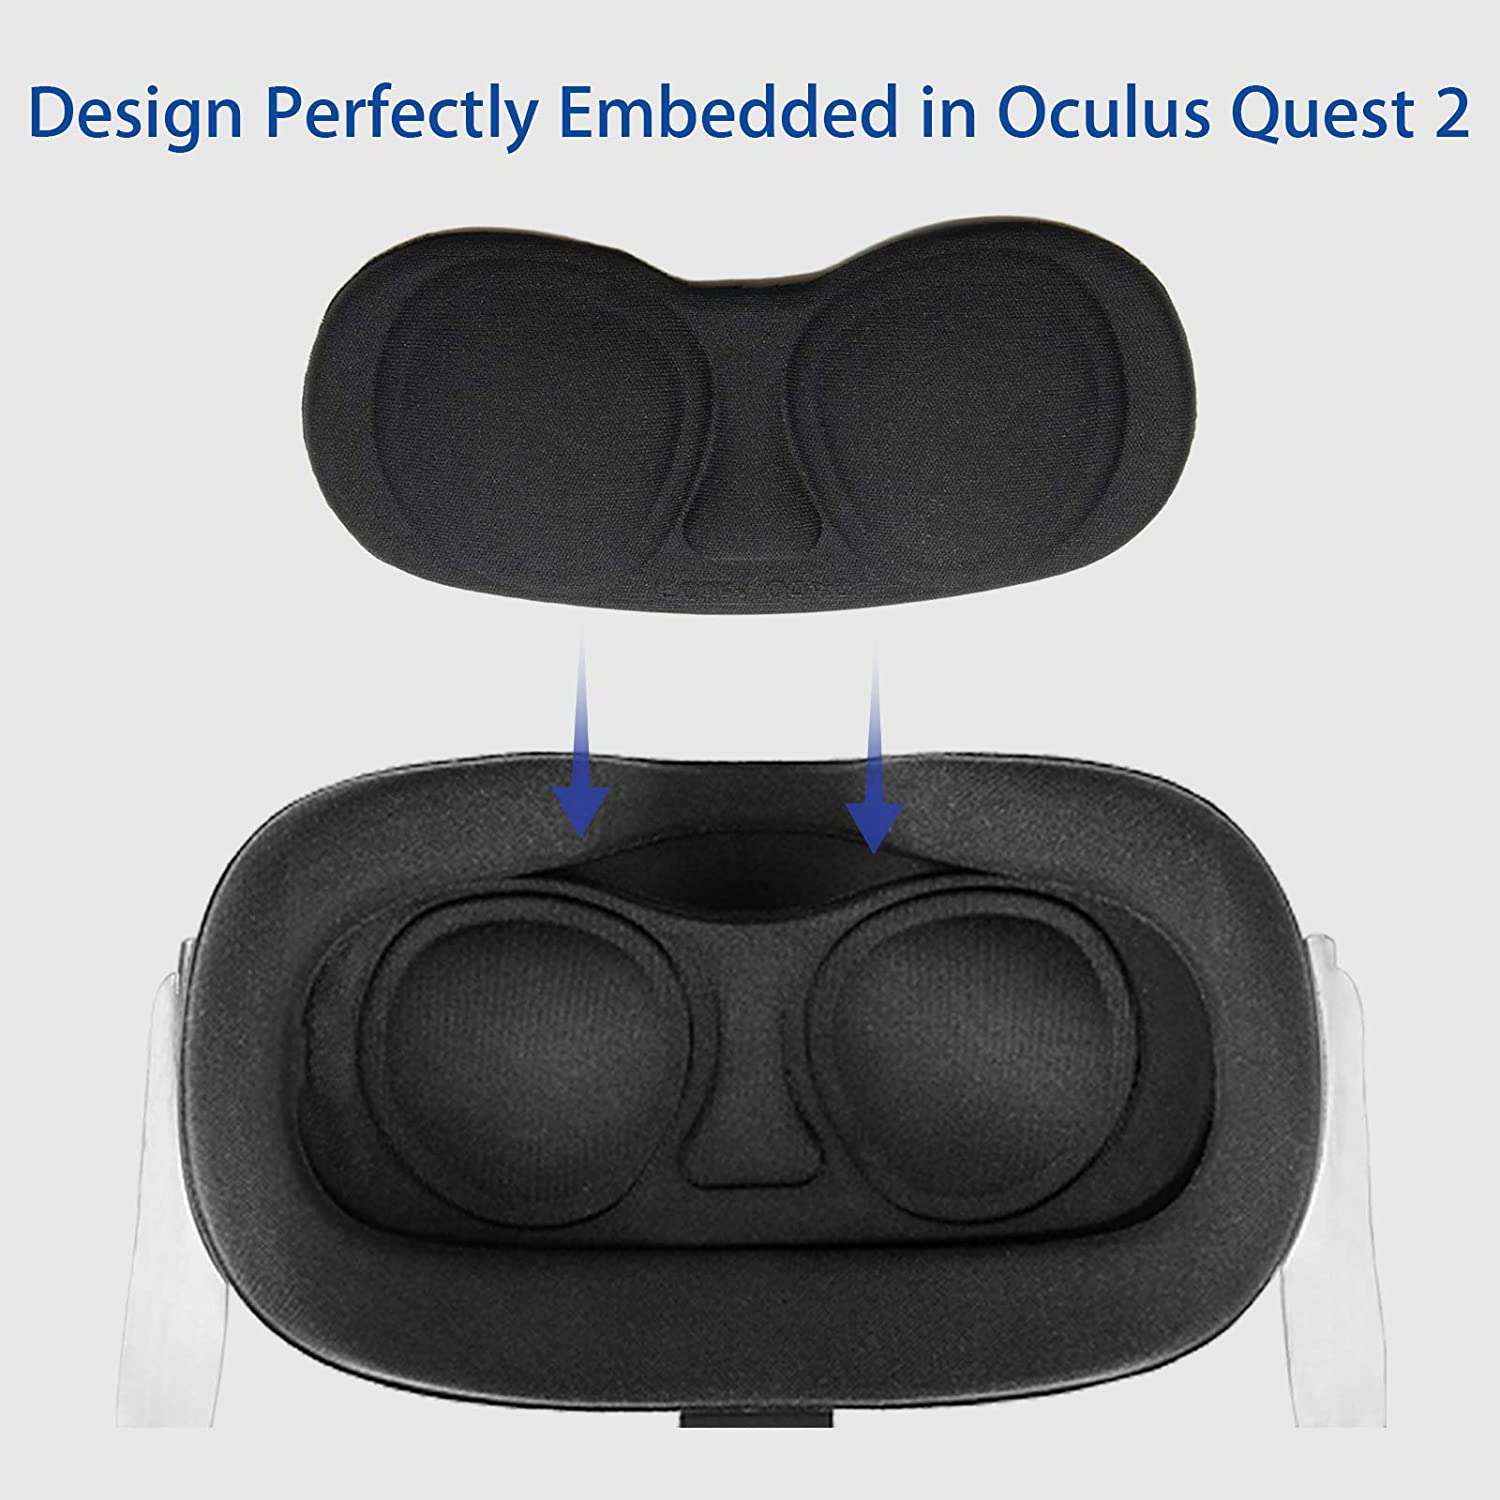 Flexible lens protector keeps VR goggles safe from dust and damage.